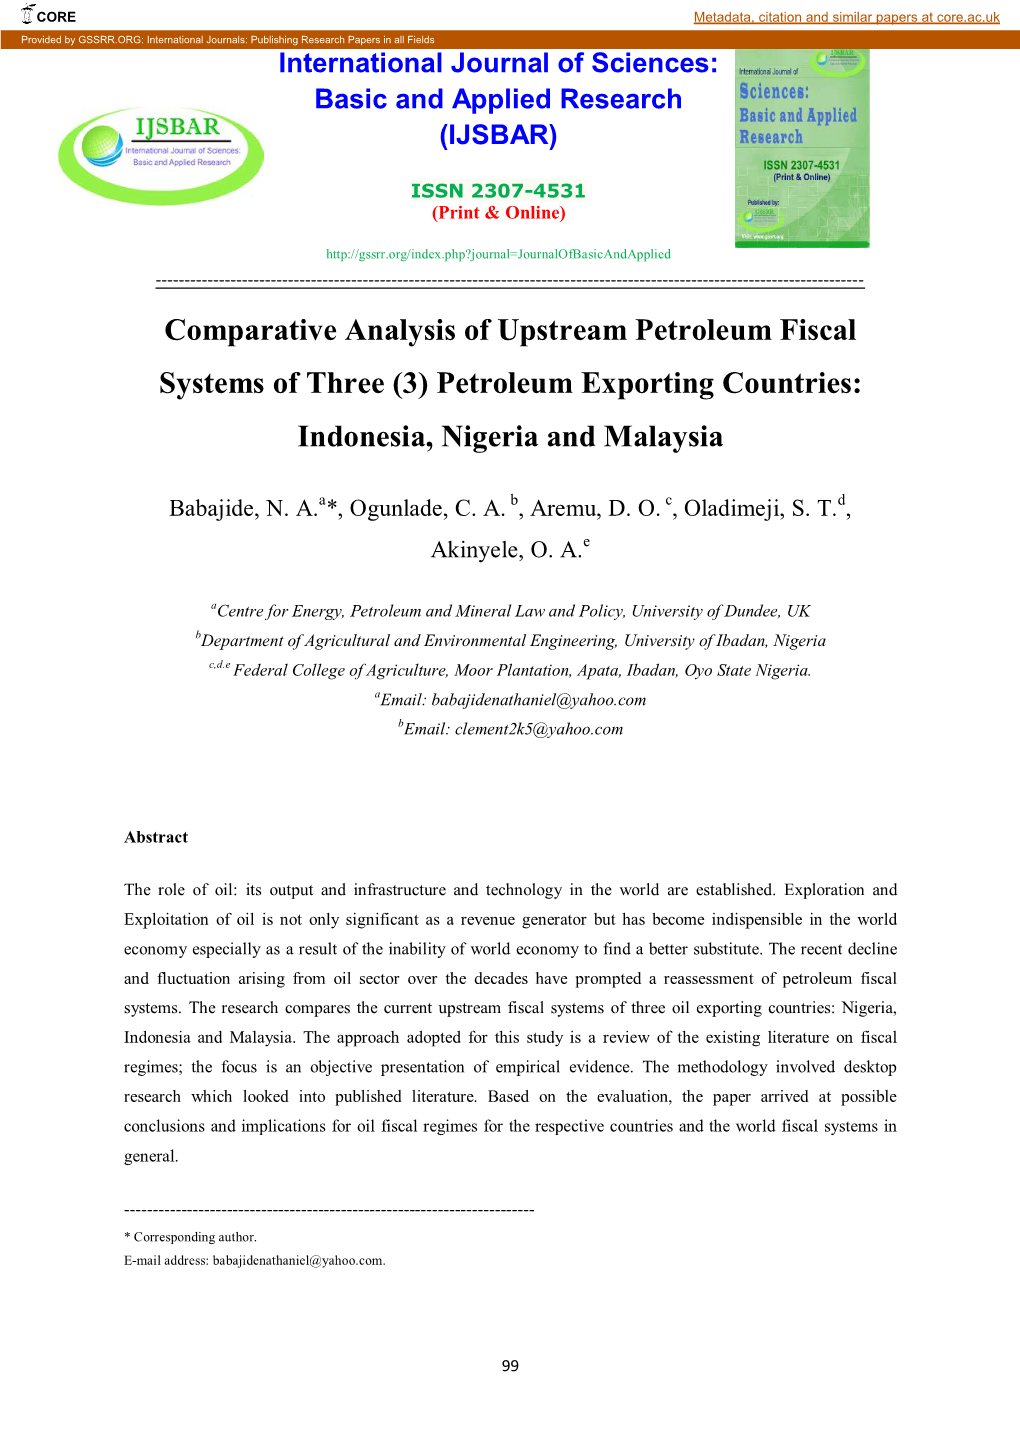 Comparative Analysis of Upstream Petroleum Fiscal Systems of Three (3) Petroleum Exporting Countries: Indonesia, Nigeria and Malaysia